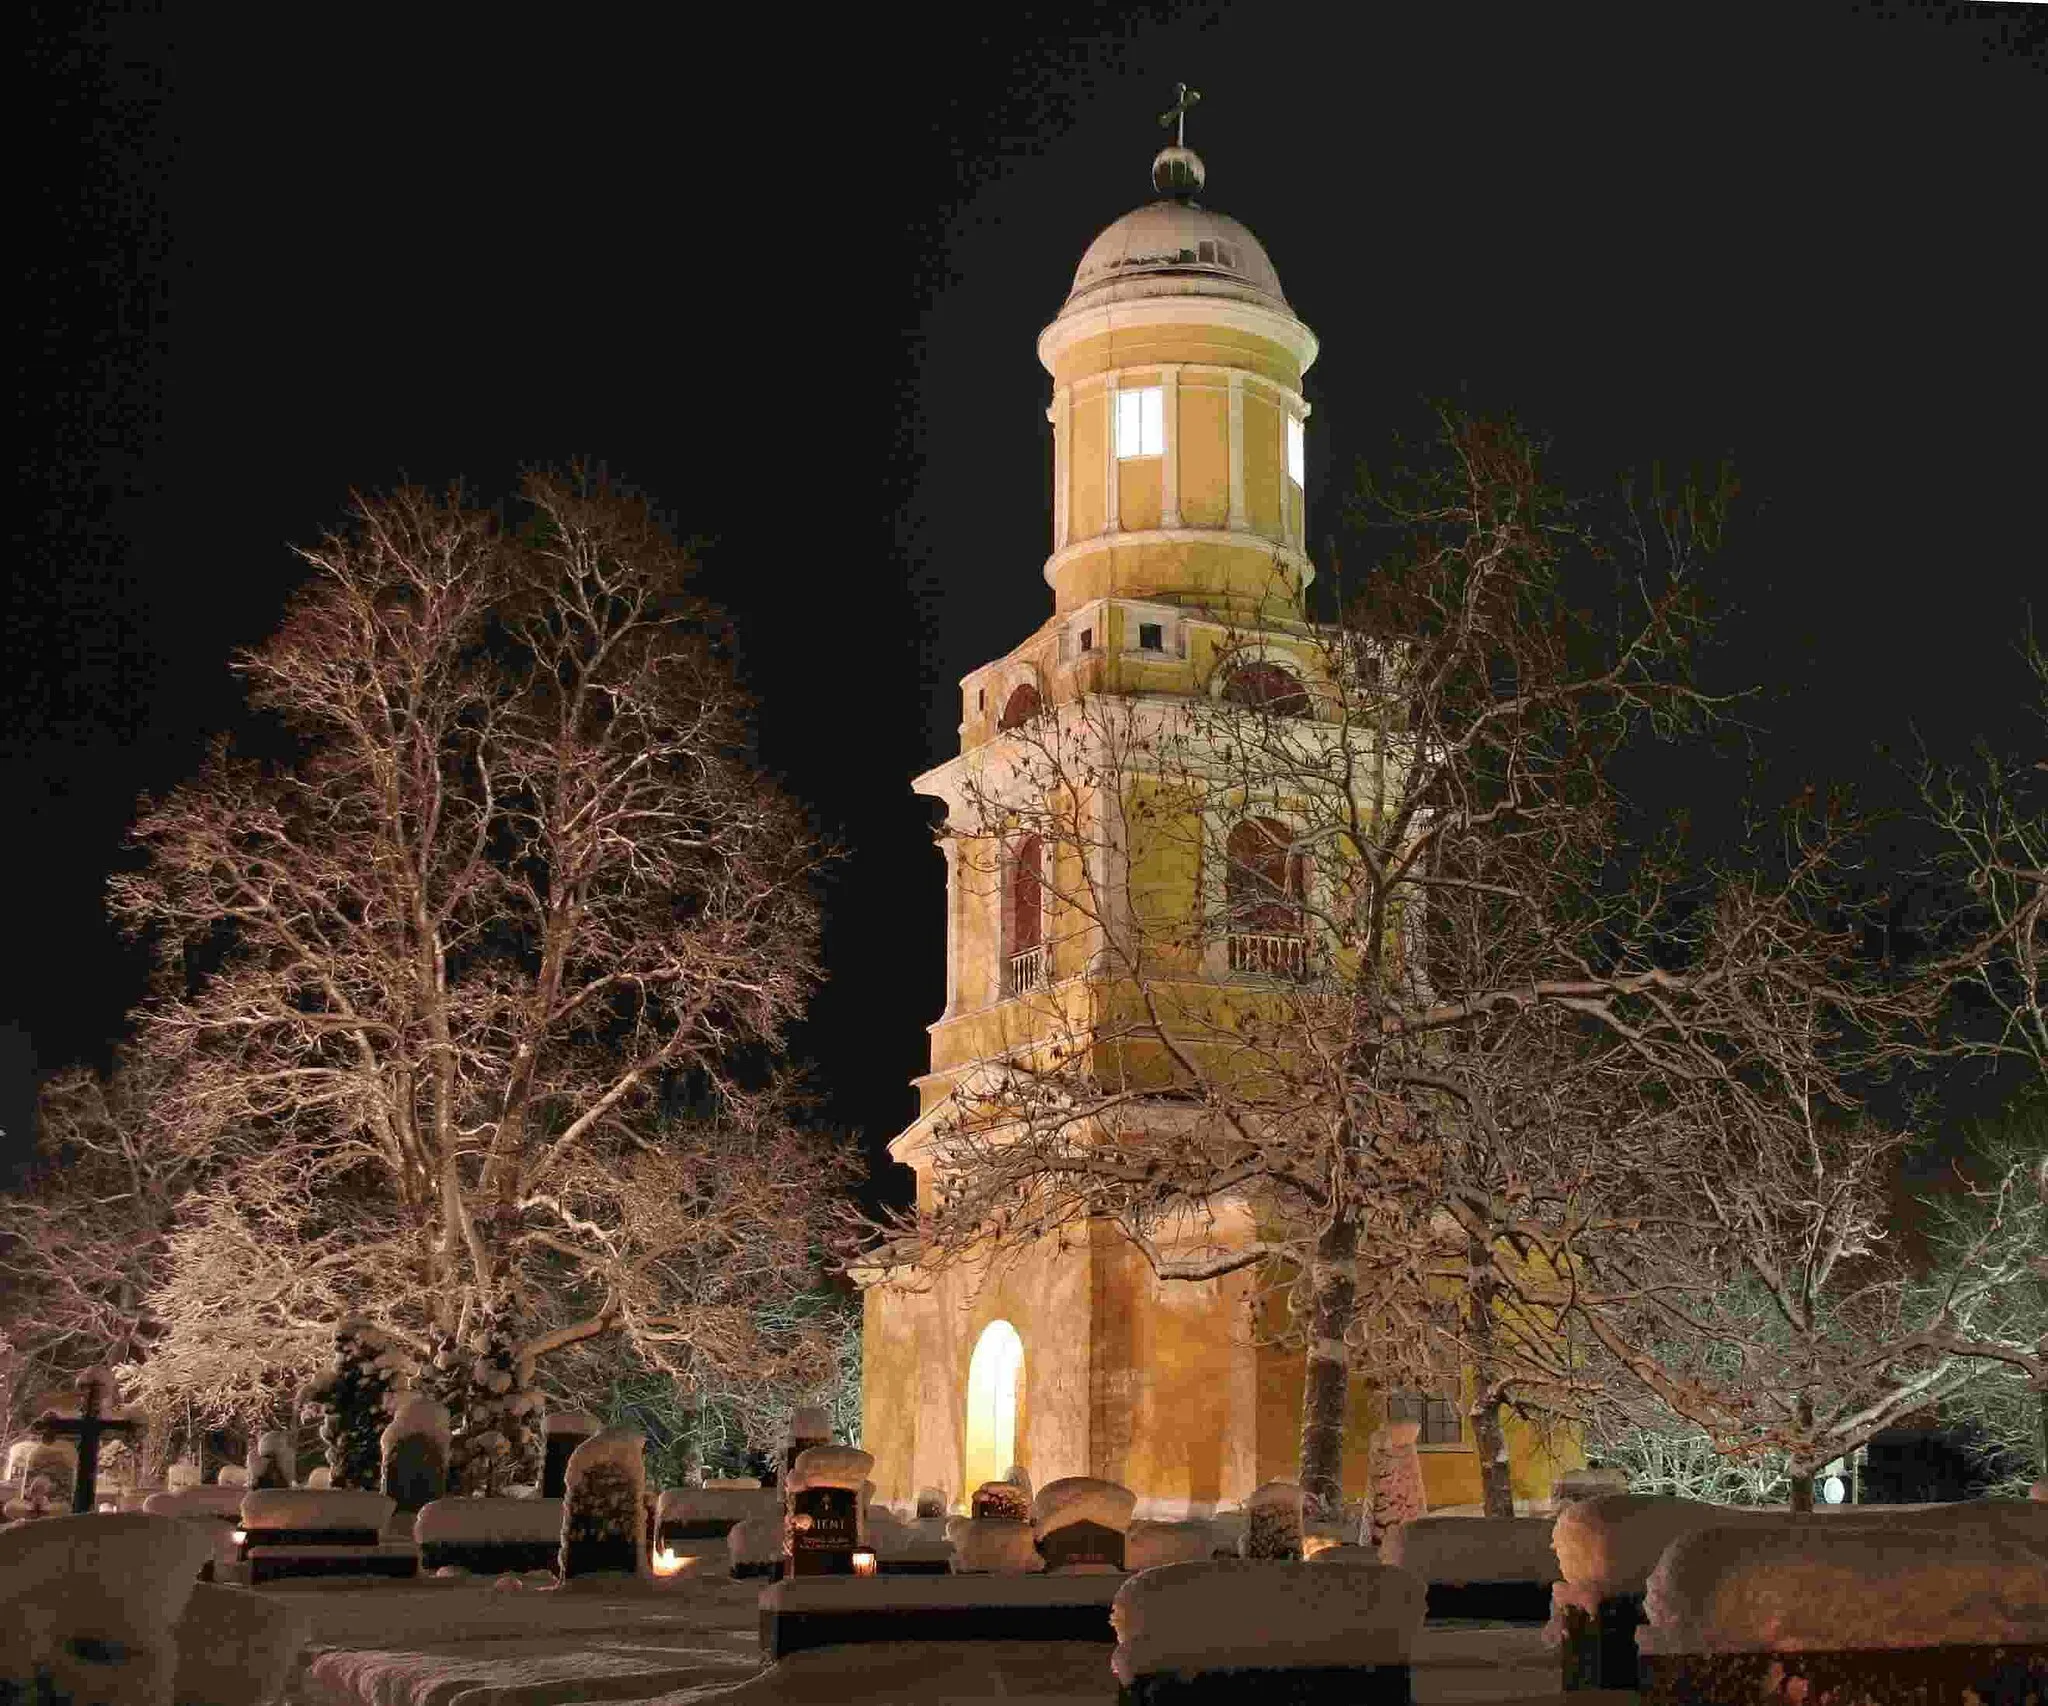 Photo showing: The bell tower of Hollola Evangelical Lutheran parish in the old center of Hollola municipality near the city of Lahti, Finland.  The neoclassical (empire) tower was designed by architect Carl Ludvig Engel and it was built in 1829–1831.